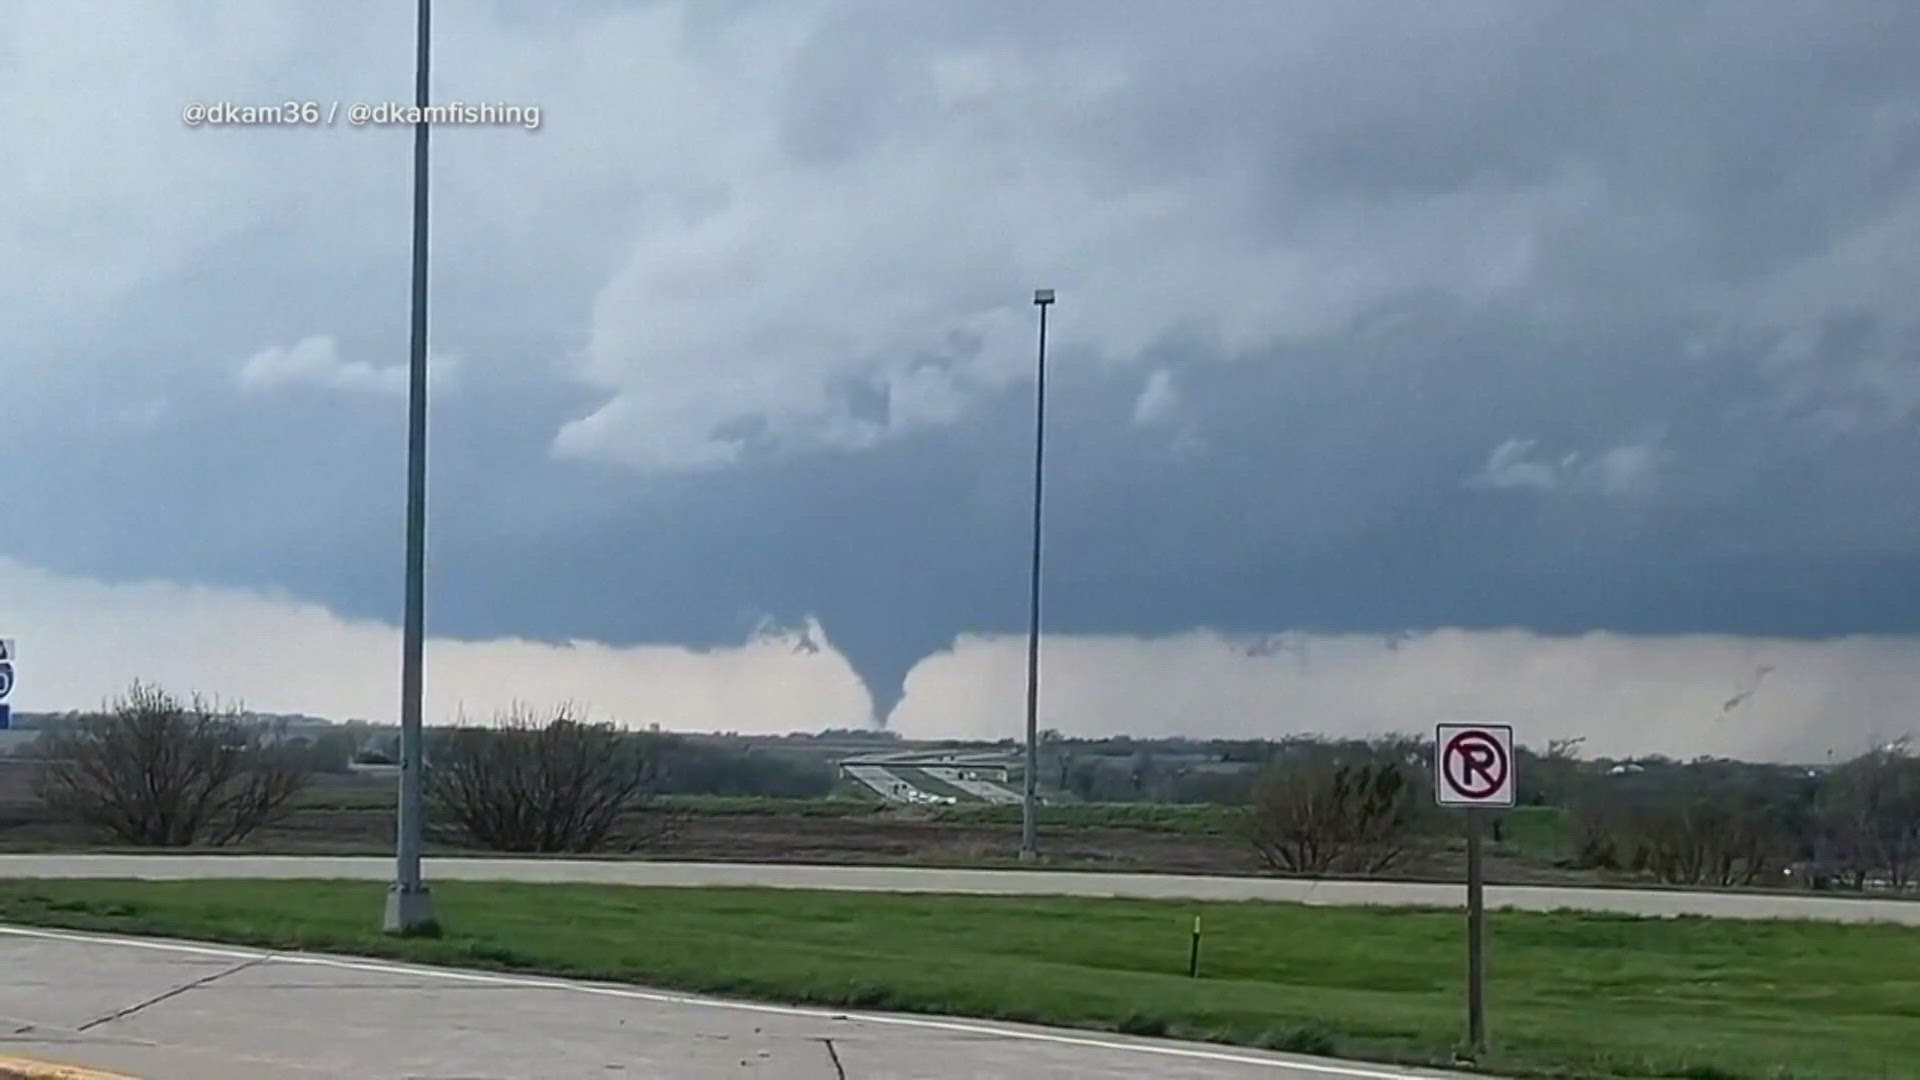 Multiple tornadoes were reported in Nebraska and Iowa on Friday, but the most destructive storm moved from a largely rural area into suburbs northwest of Omaha.